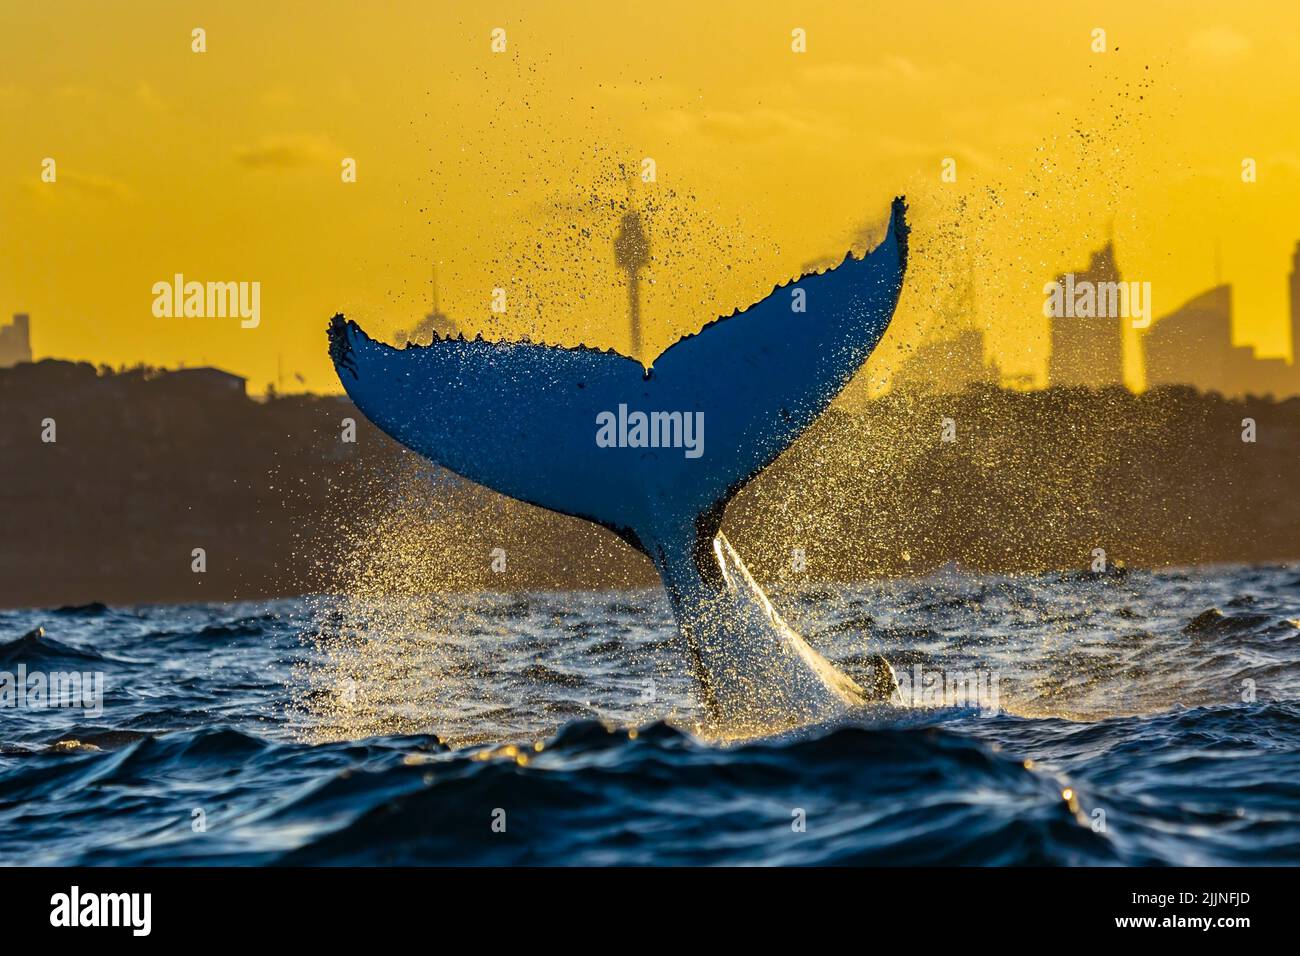 Humpback whale tail with Sydney Skyline in the background at sunset, Sydney, Australia Stock Photo